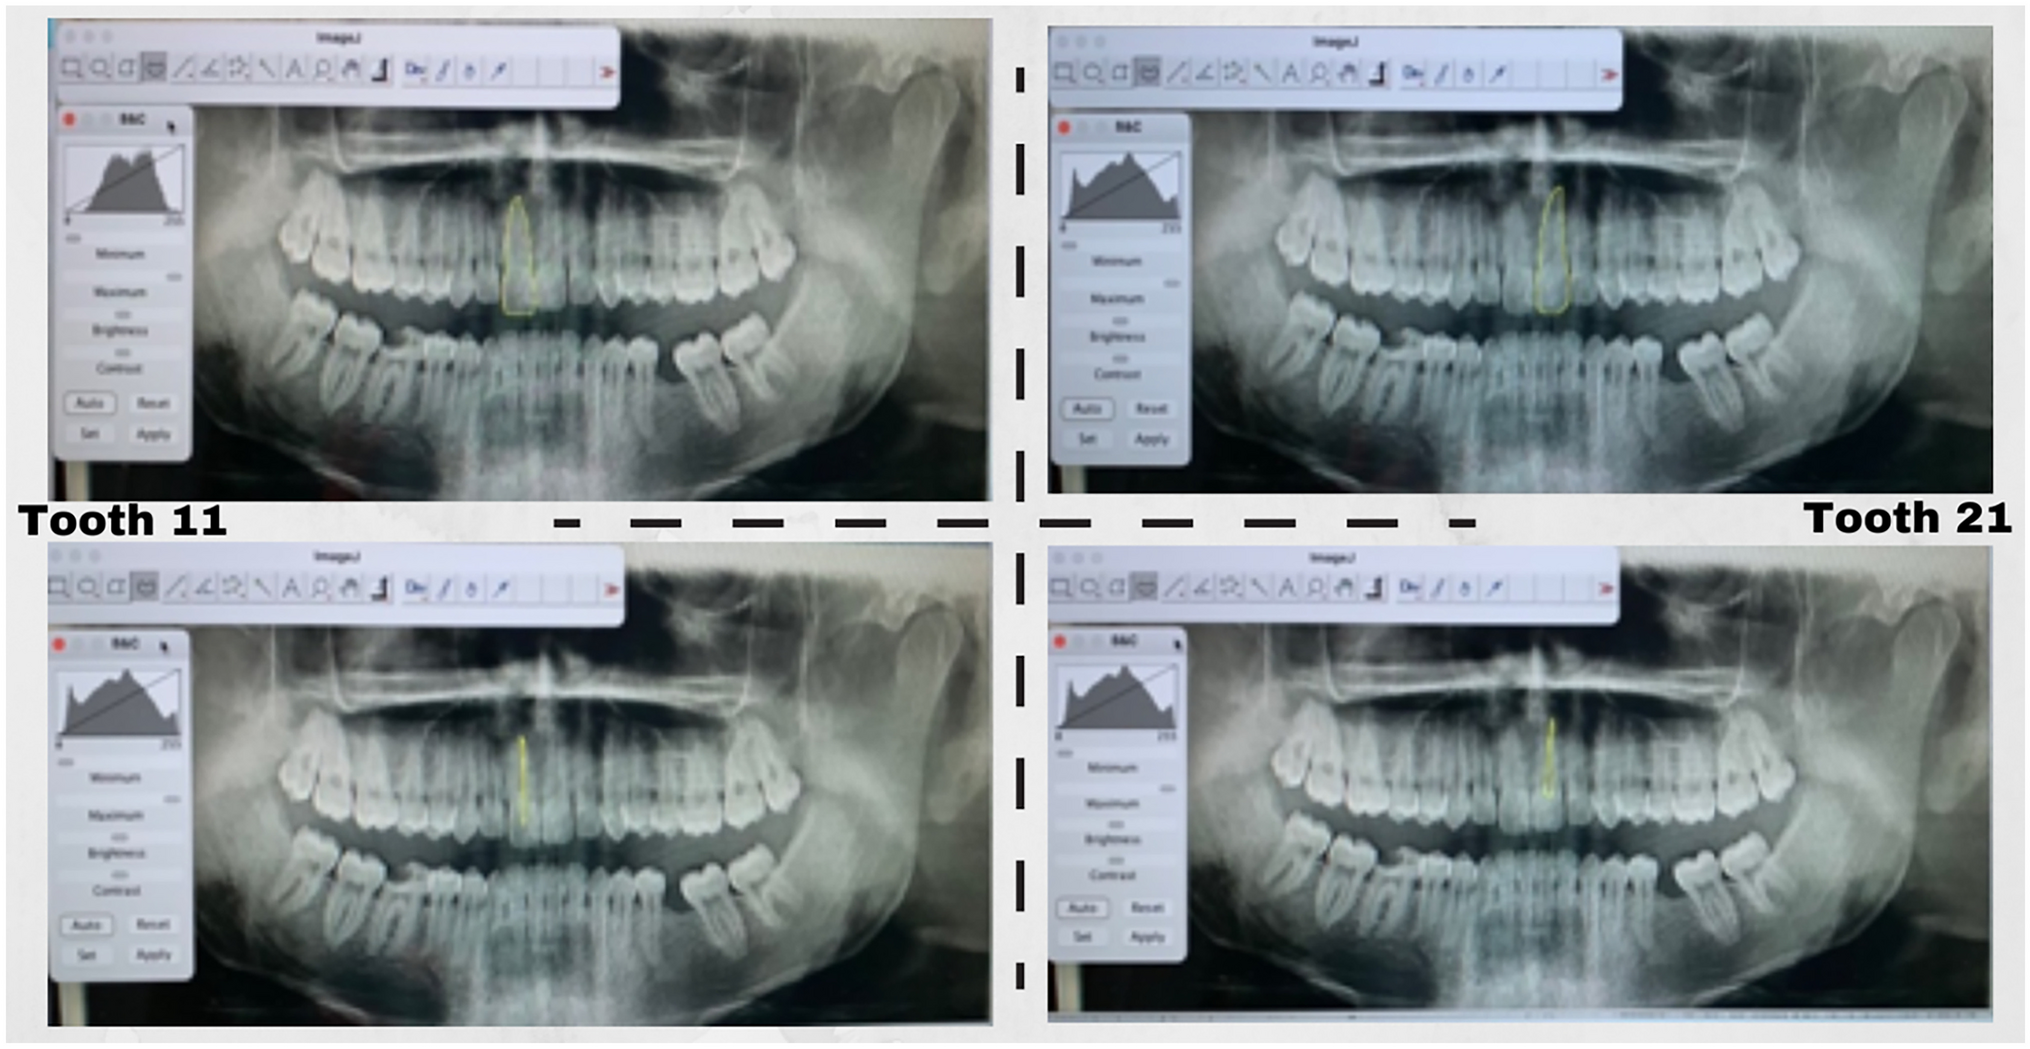 Study of secondary dentine deposition in central incisors as an age estimation method for adults